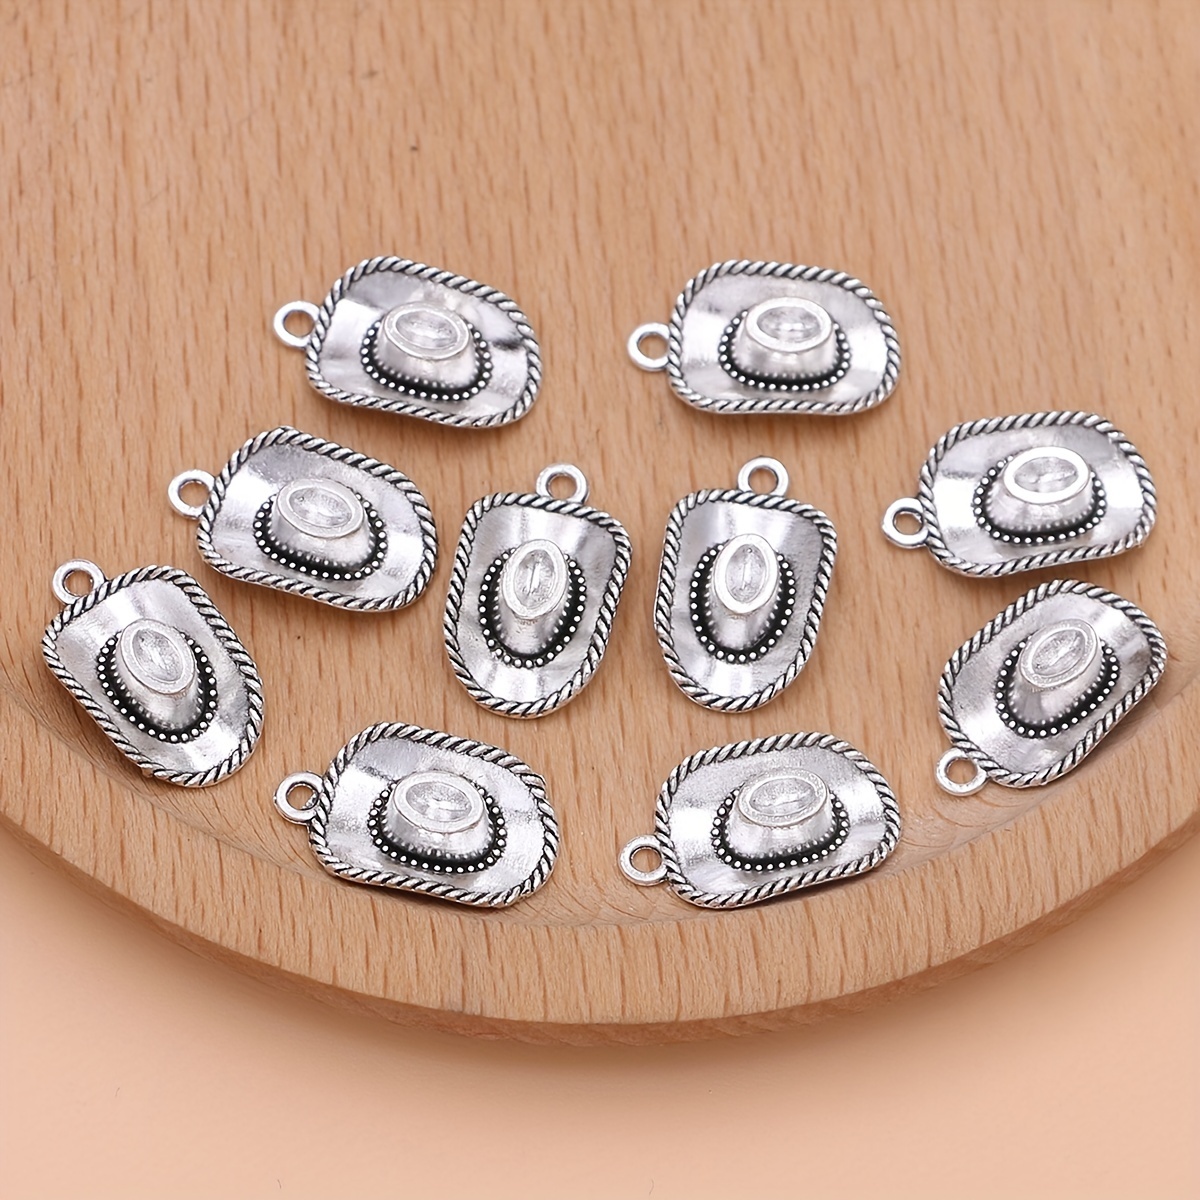 10pcs Cute Unique Witch Hat Charms Pendant Alloy Halloween Charms Antique  Silver Wizard Hat Beads Accessories For DIY Jewelry Making Finding Crafts Ea